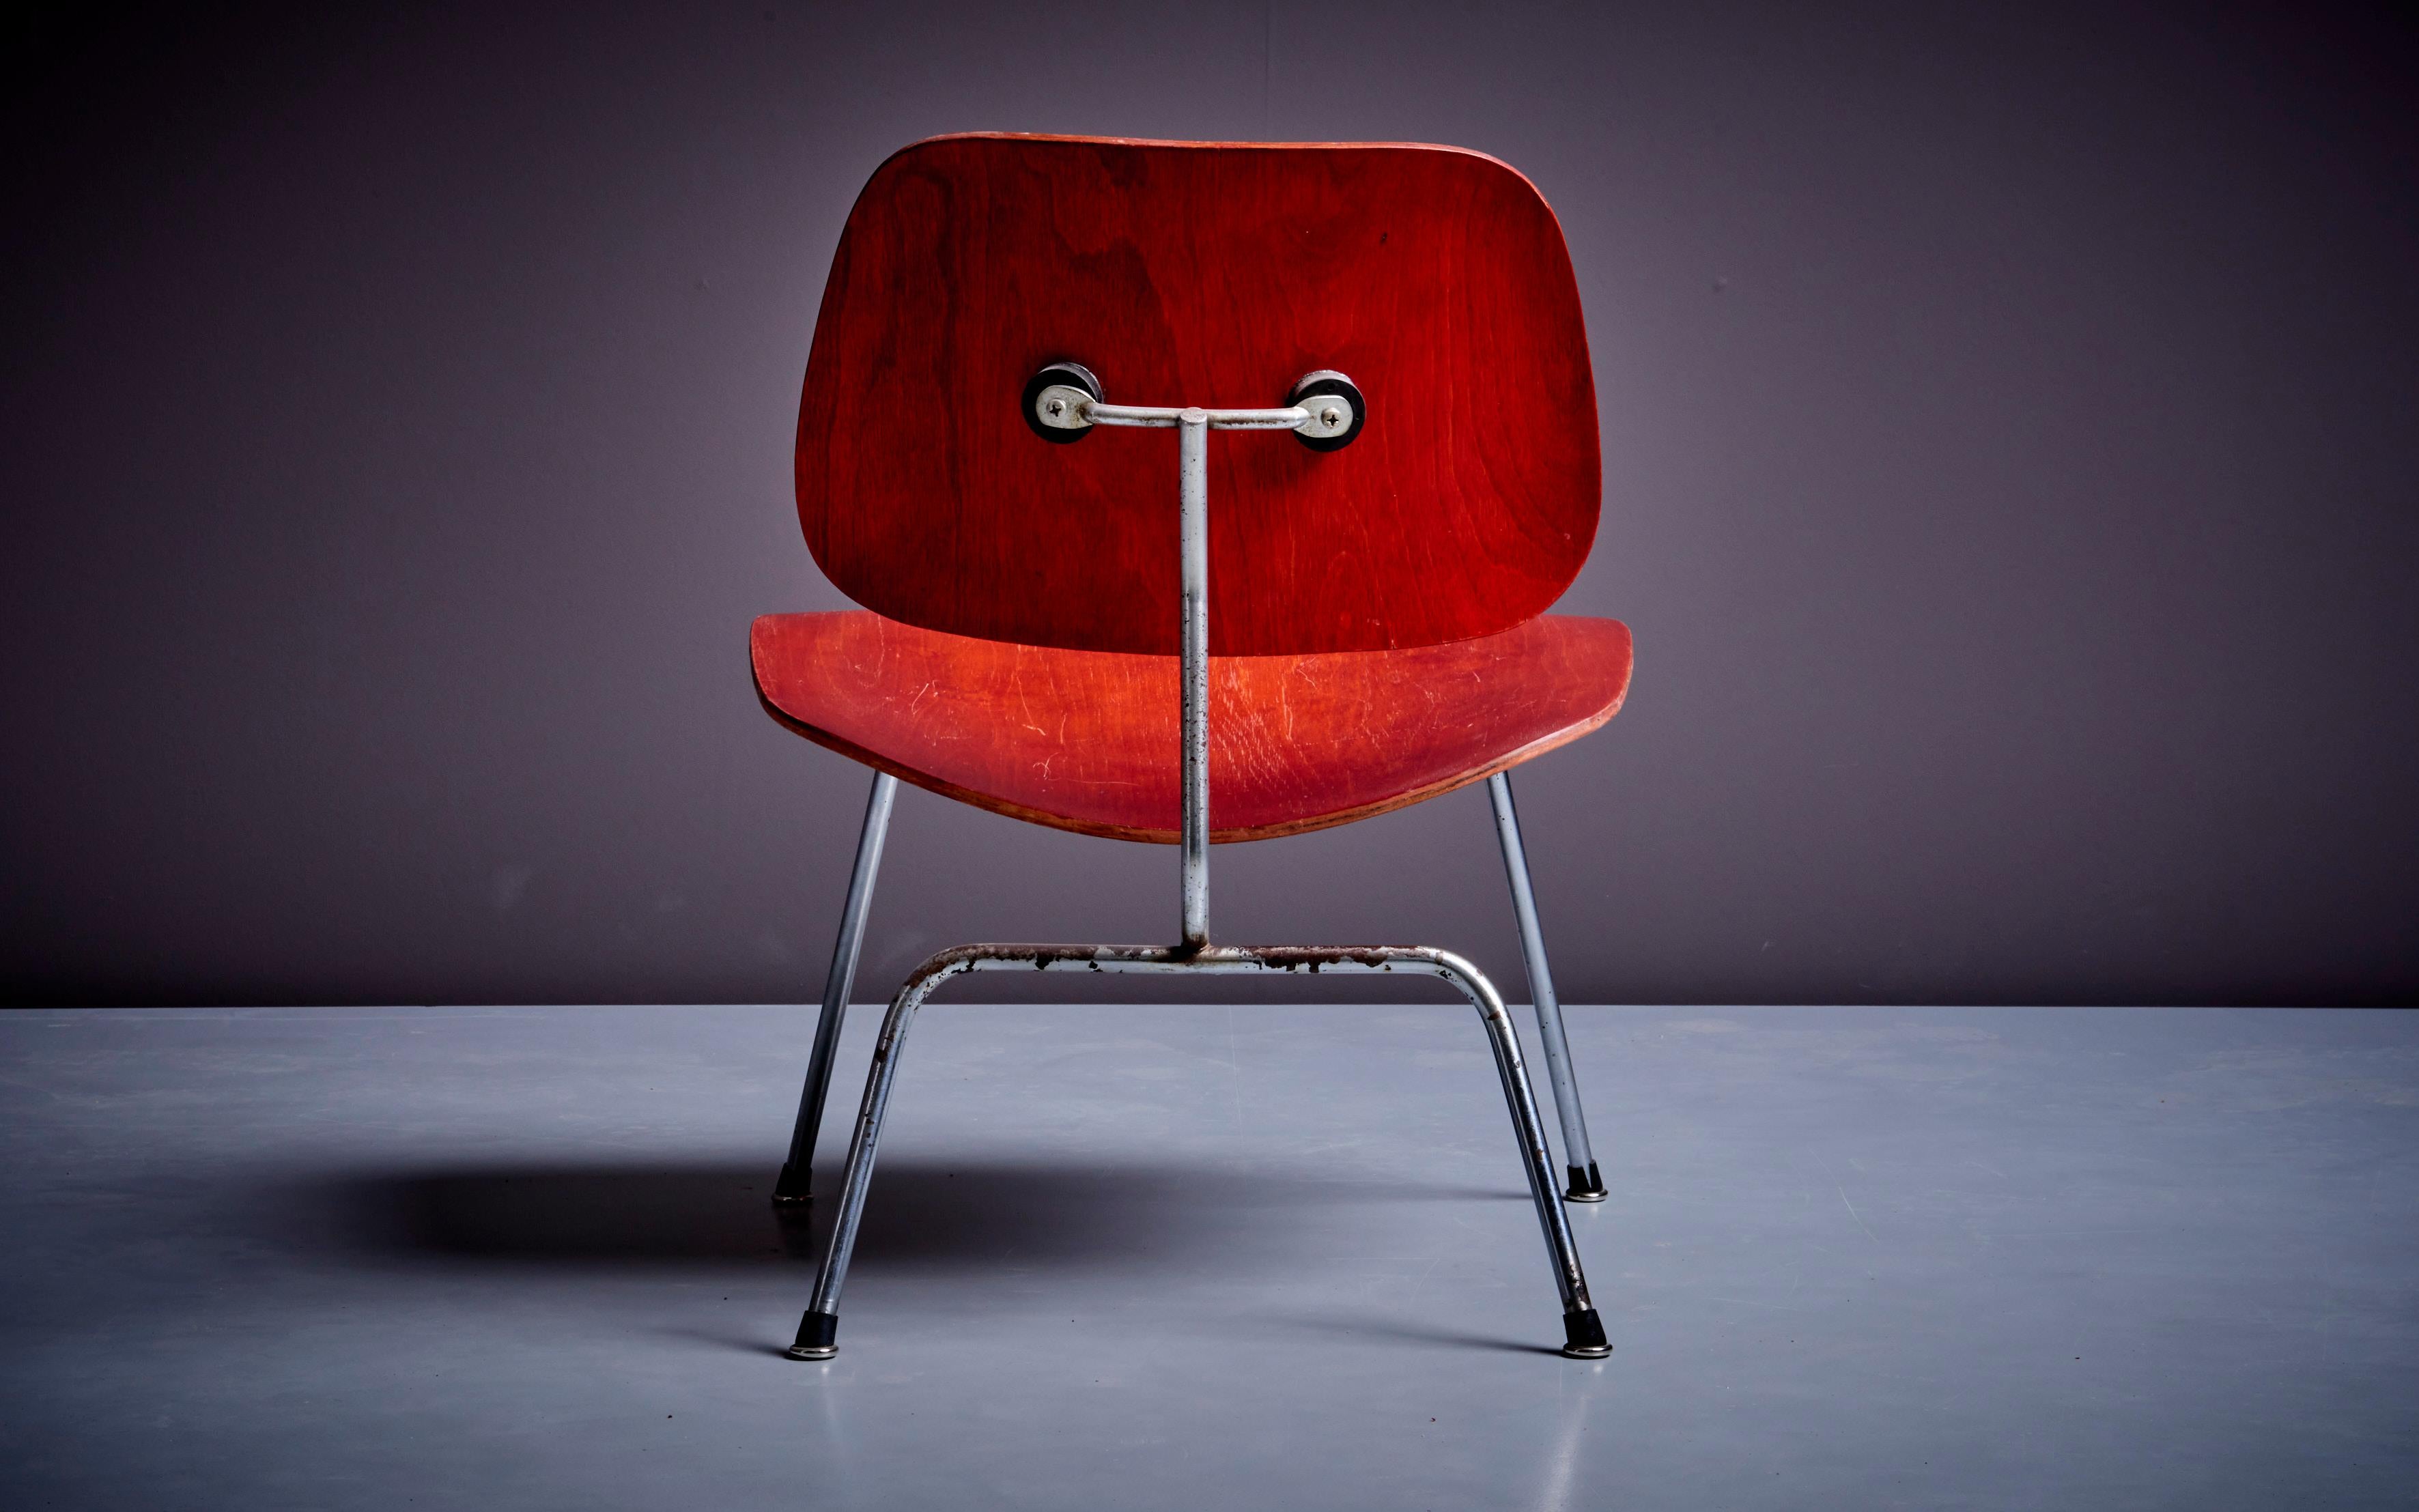 Dyed Early LCM Chair in Rare Aniline Red by Charles Eames for Herman Miller